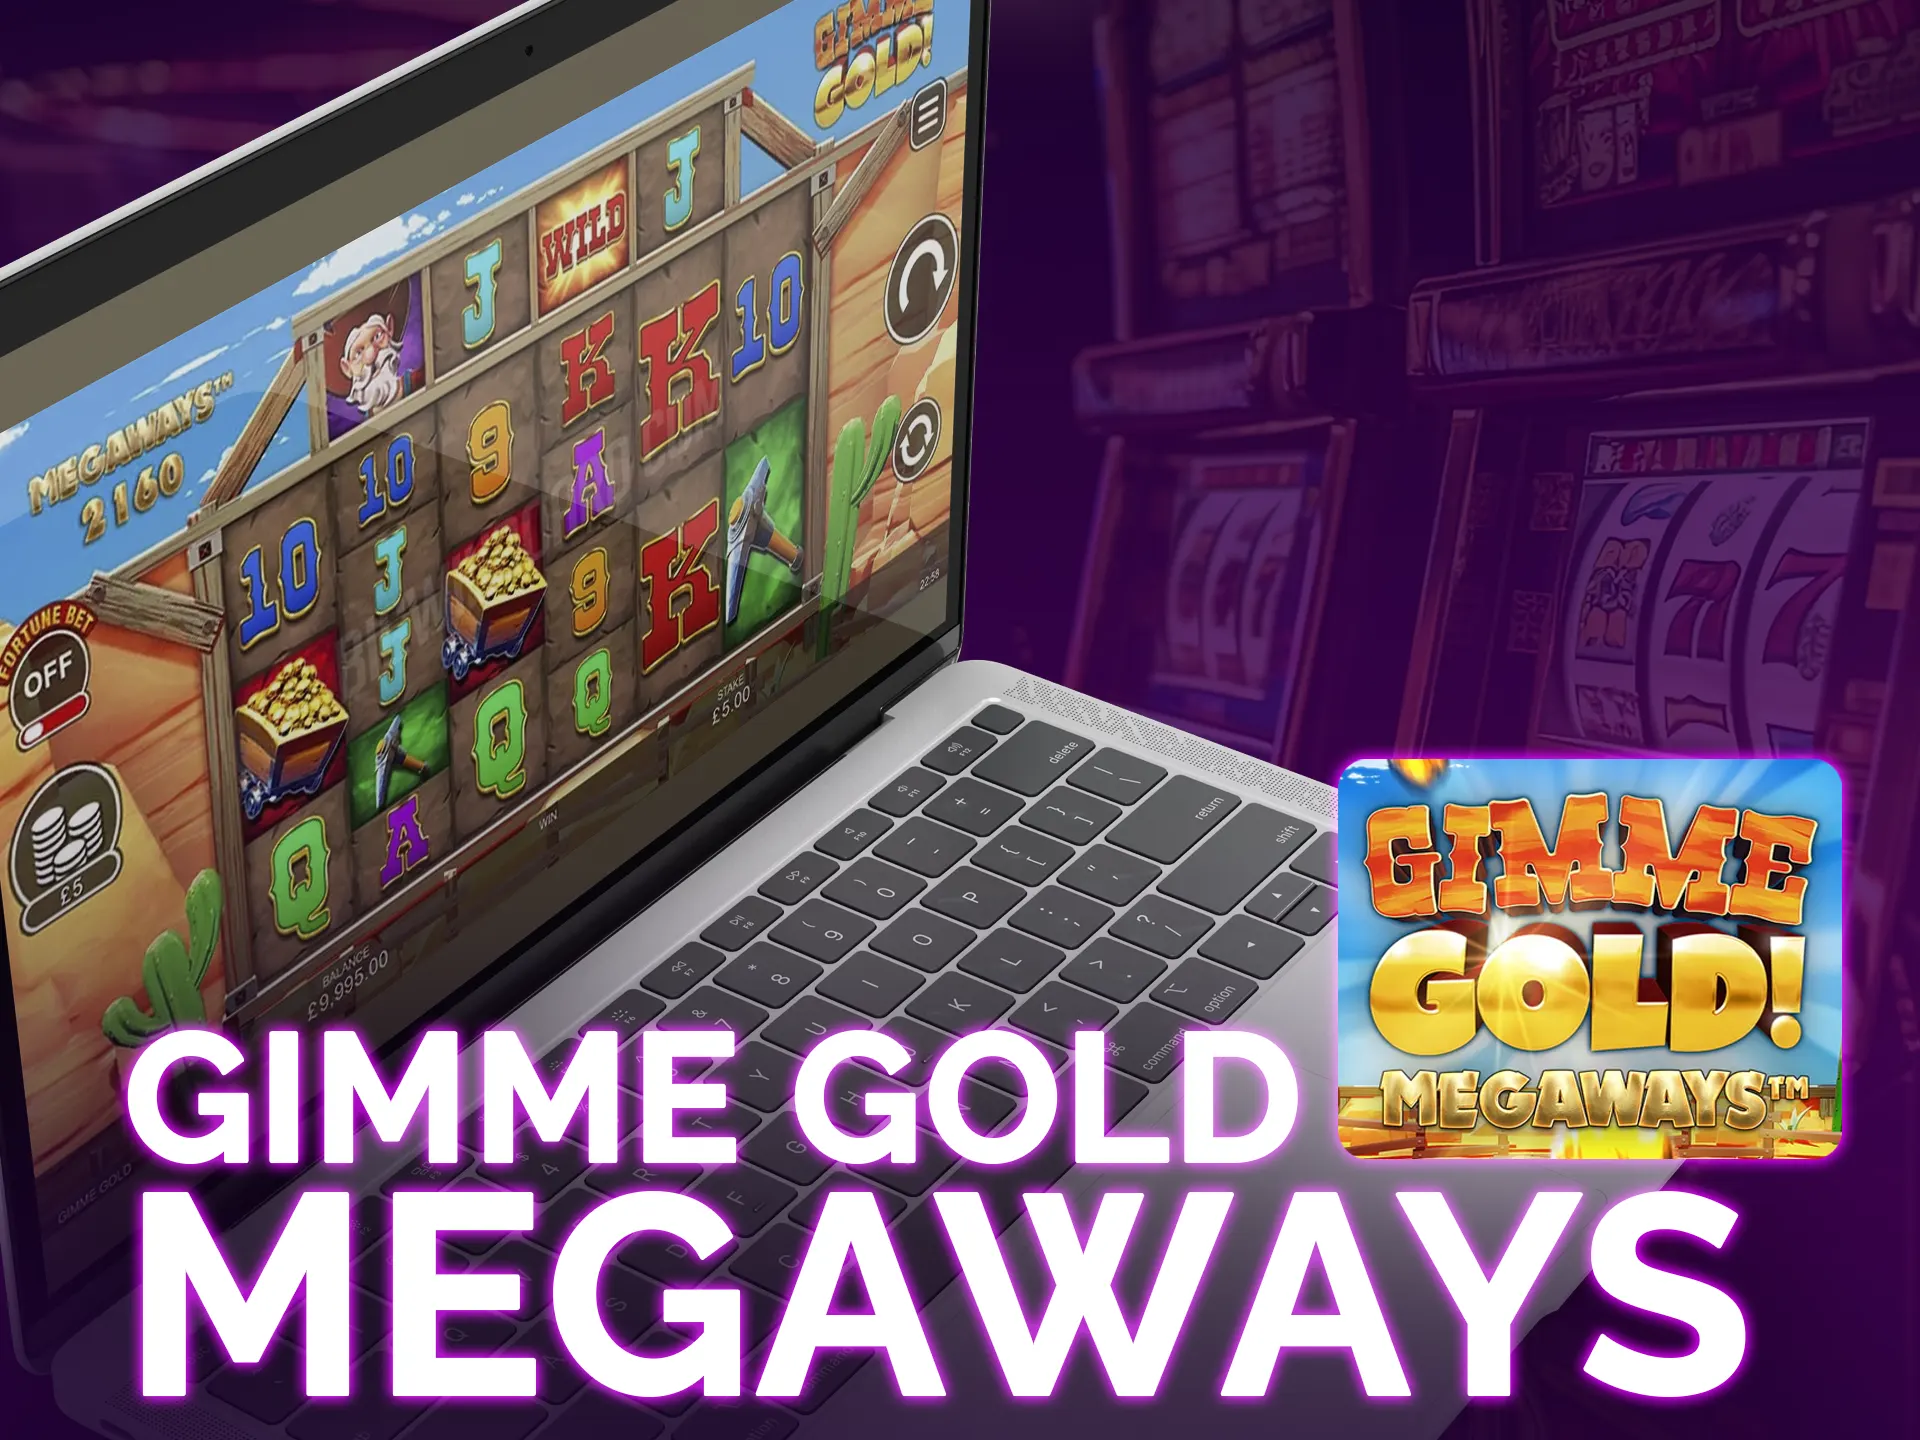 Mine for big winnings with Gimme Gold Megaways by Inspired Gaming.